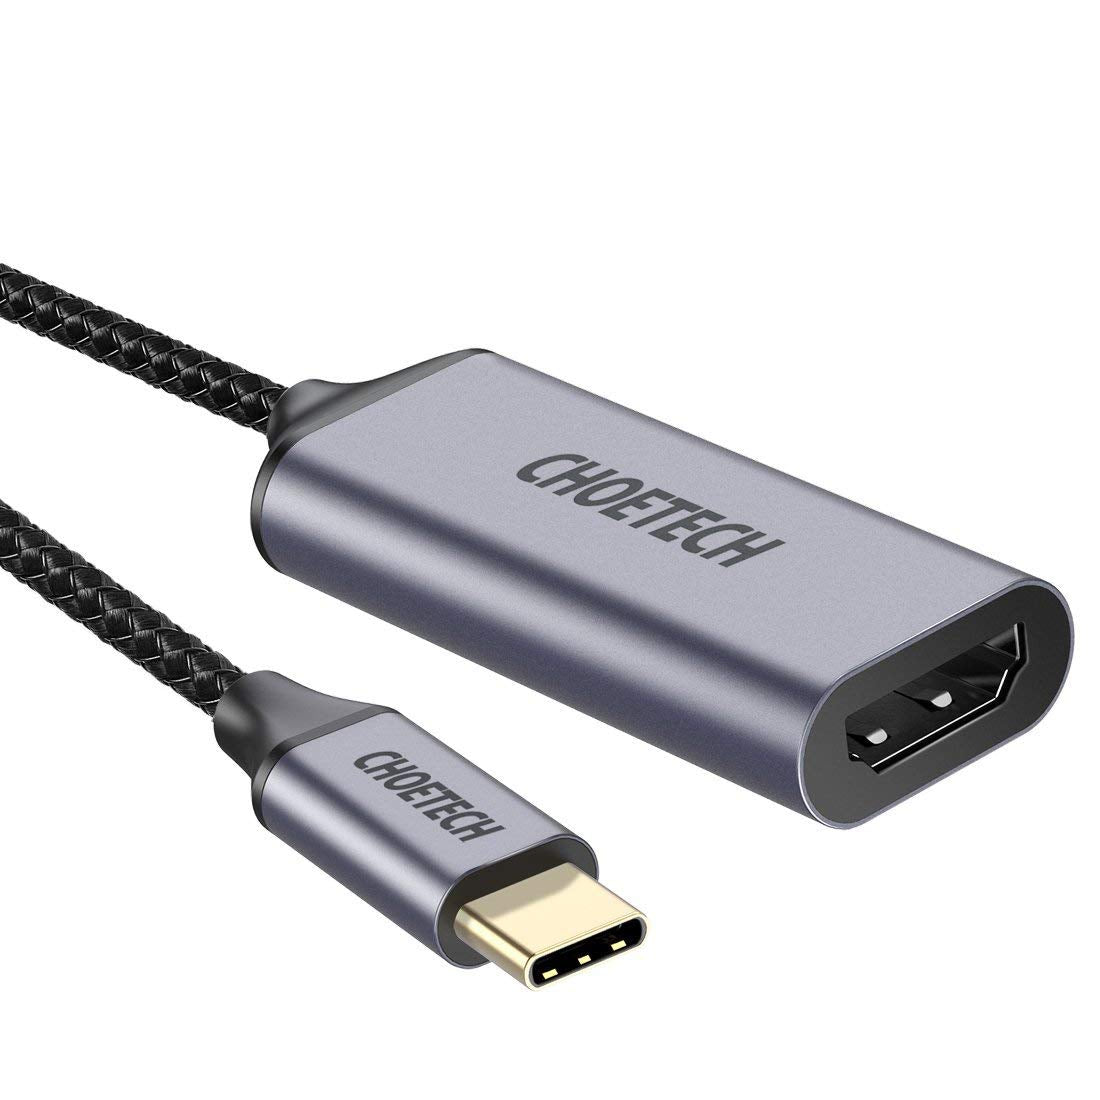 HUB-H10 USB C to HDMI Adapter with Braided Cable 4K@60Hz Sleek CHOETECH